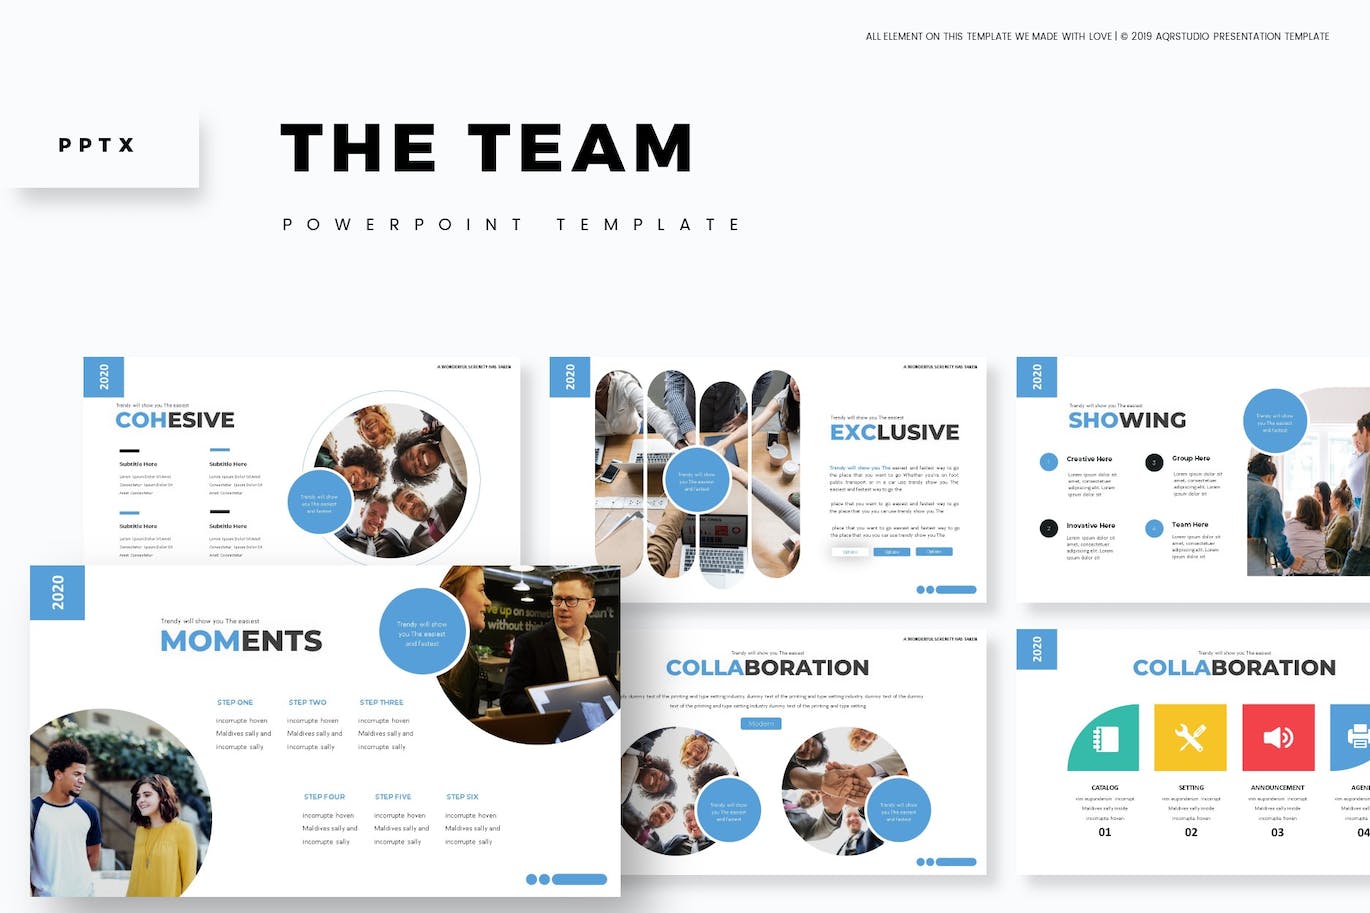 A selection of images of colorful presentation template slides on the theme of teamwork.